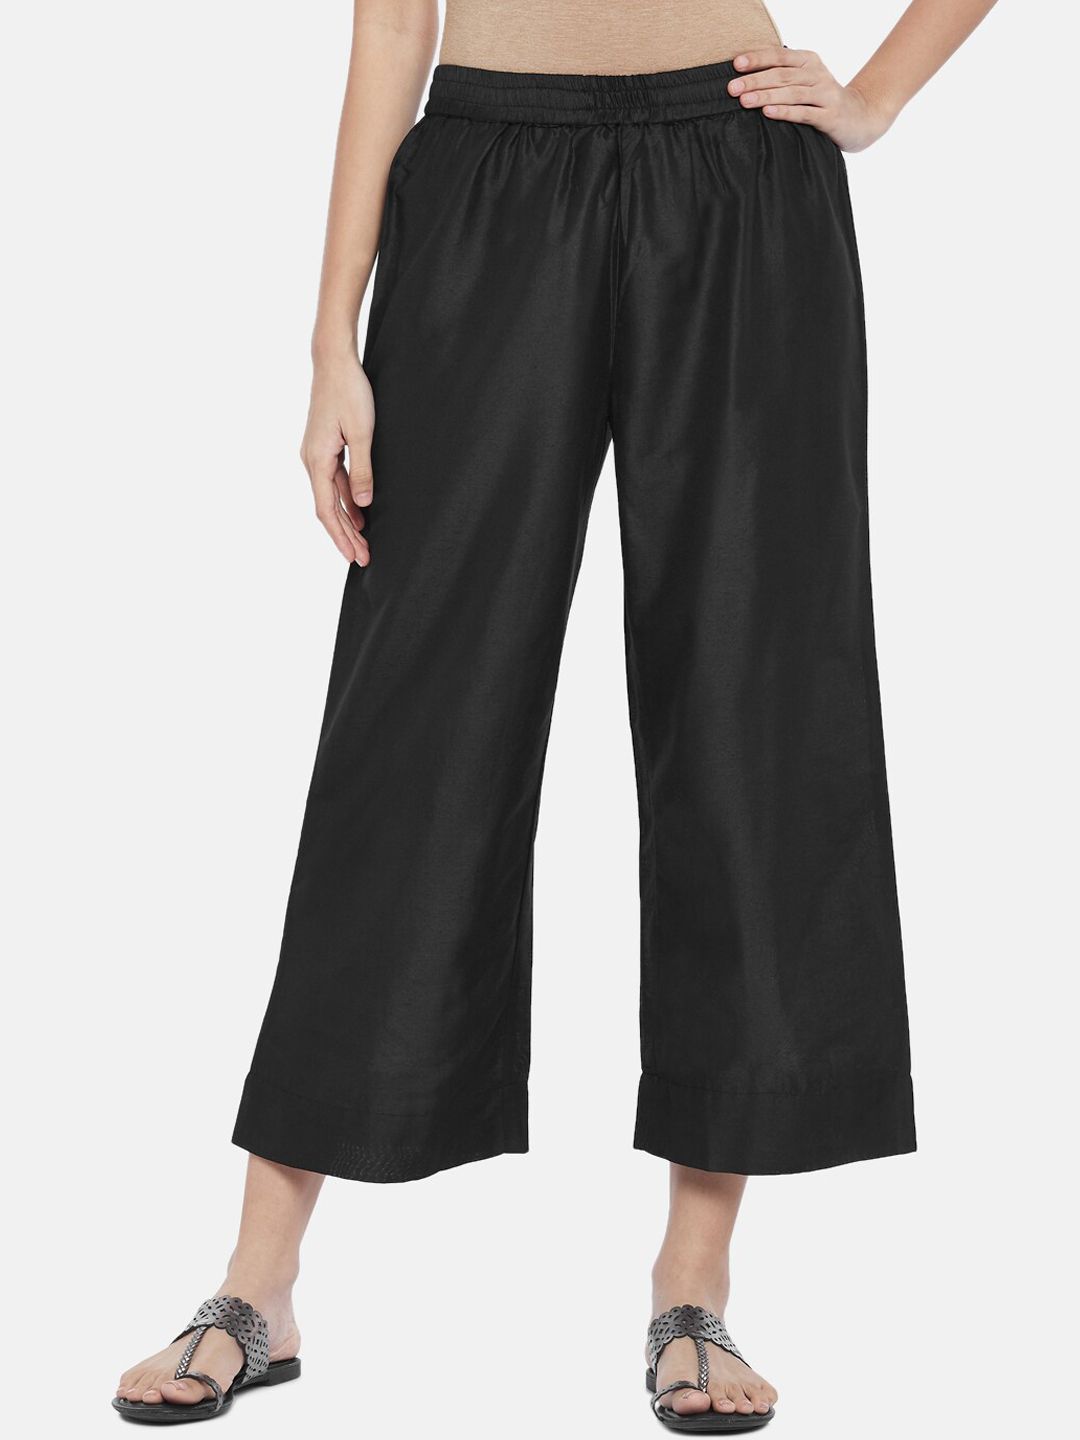 RANGMANCH BY PANTALOONS Women Black Culottes Trousers Price in India